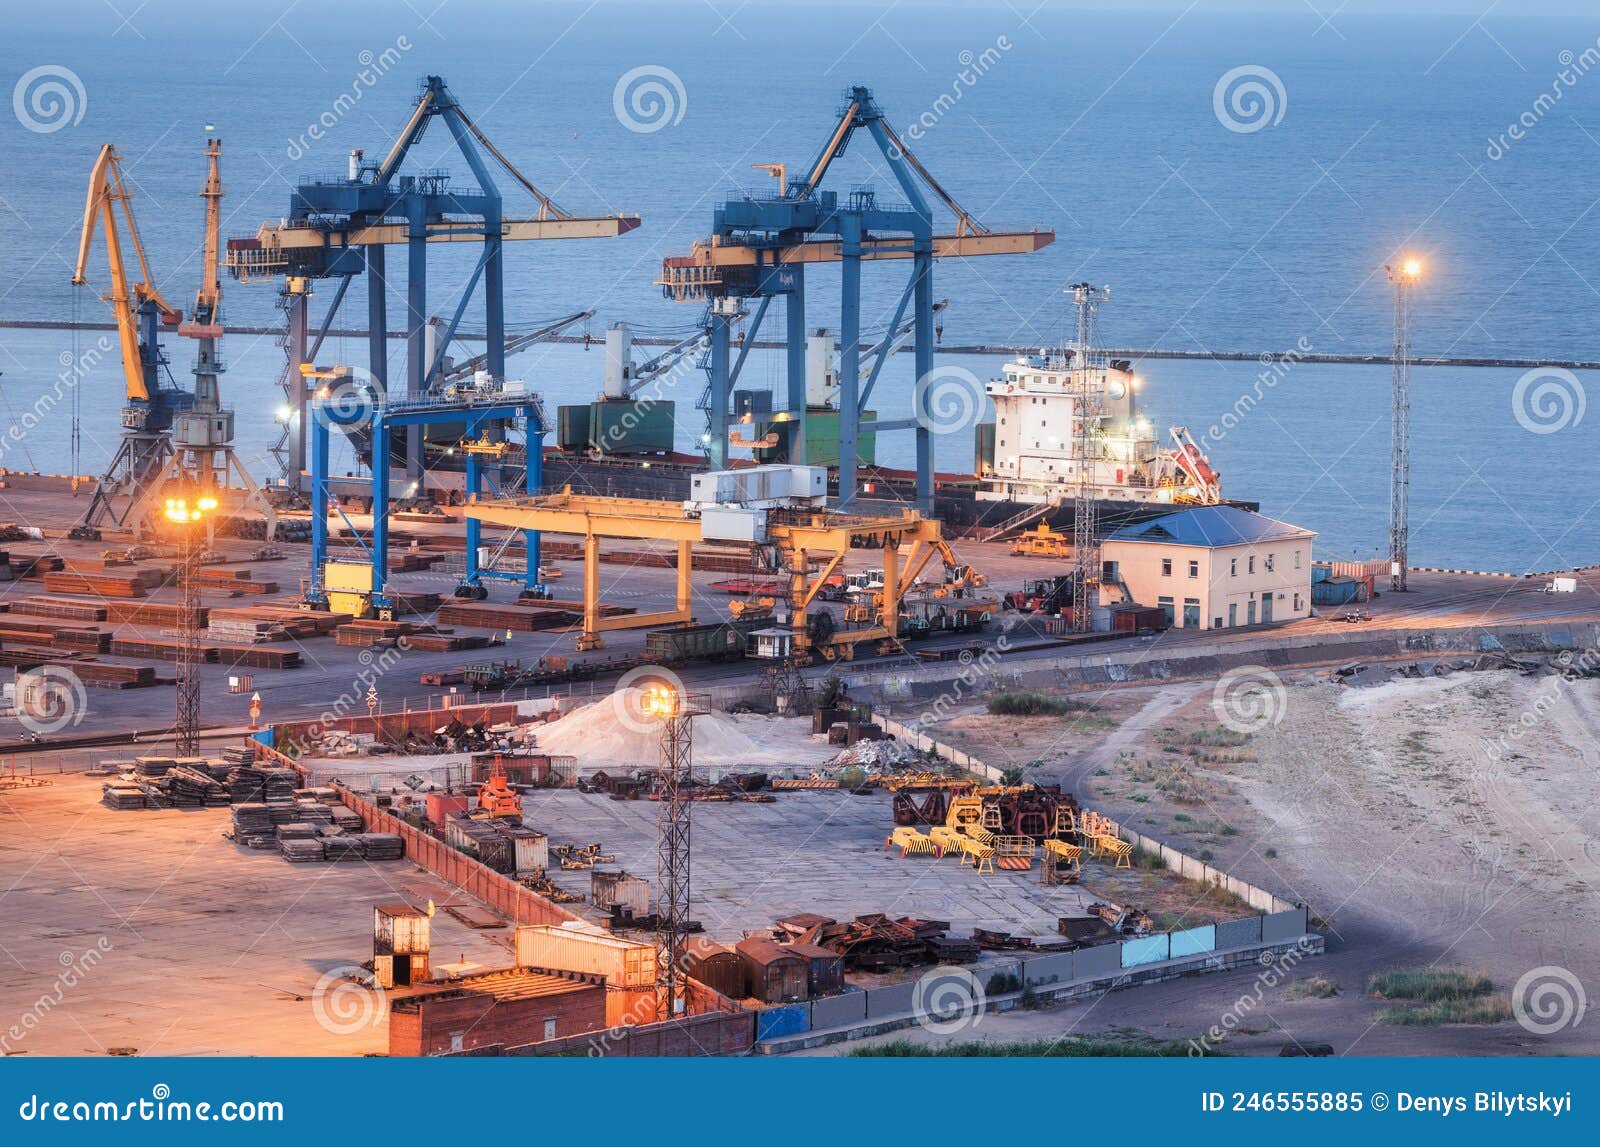 sea commercial port at night in mariupol, ukraine before the war